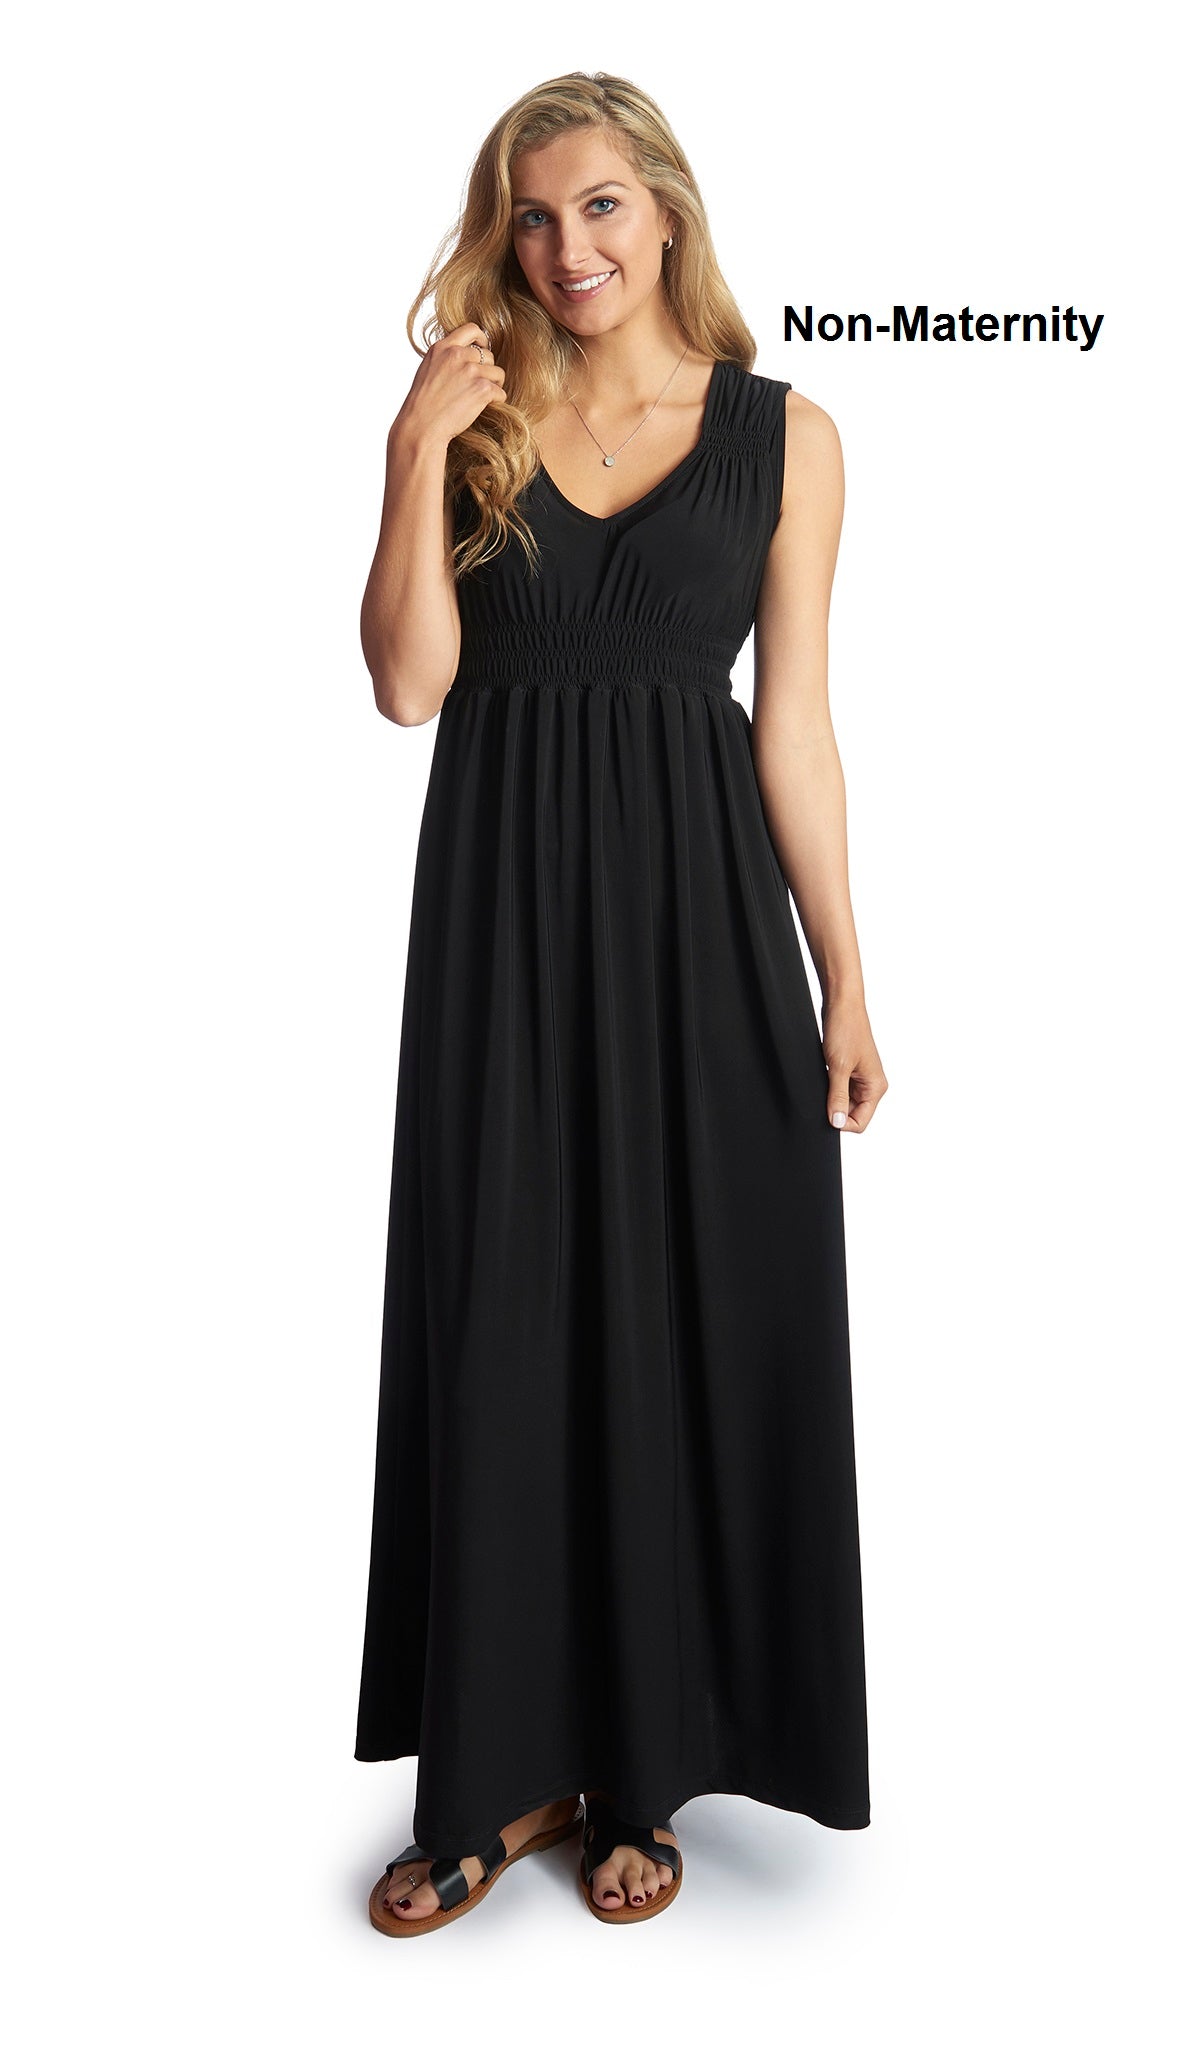 Black Valeria dress worn as non-maternity style by woman with one hand touching her hair.